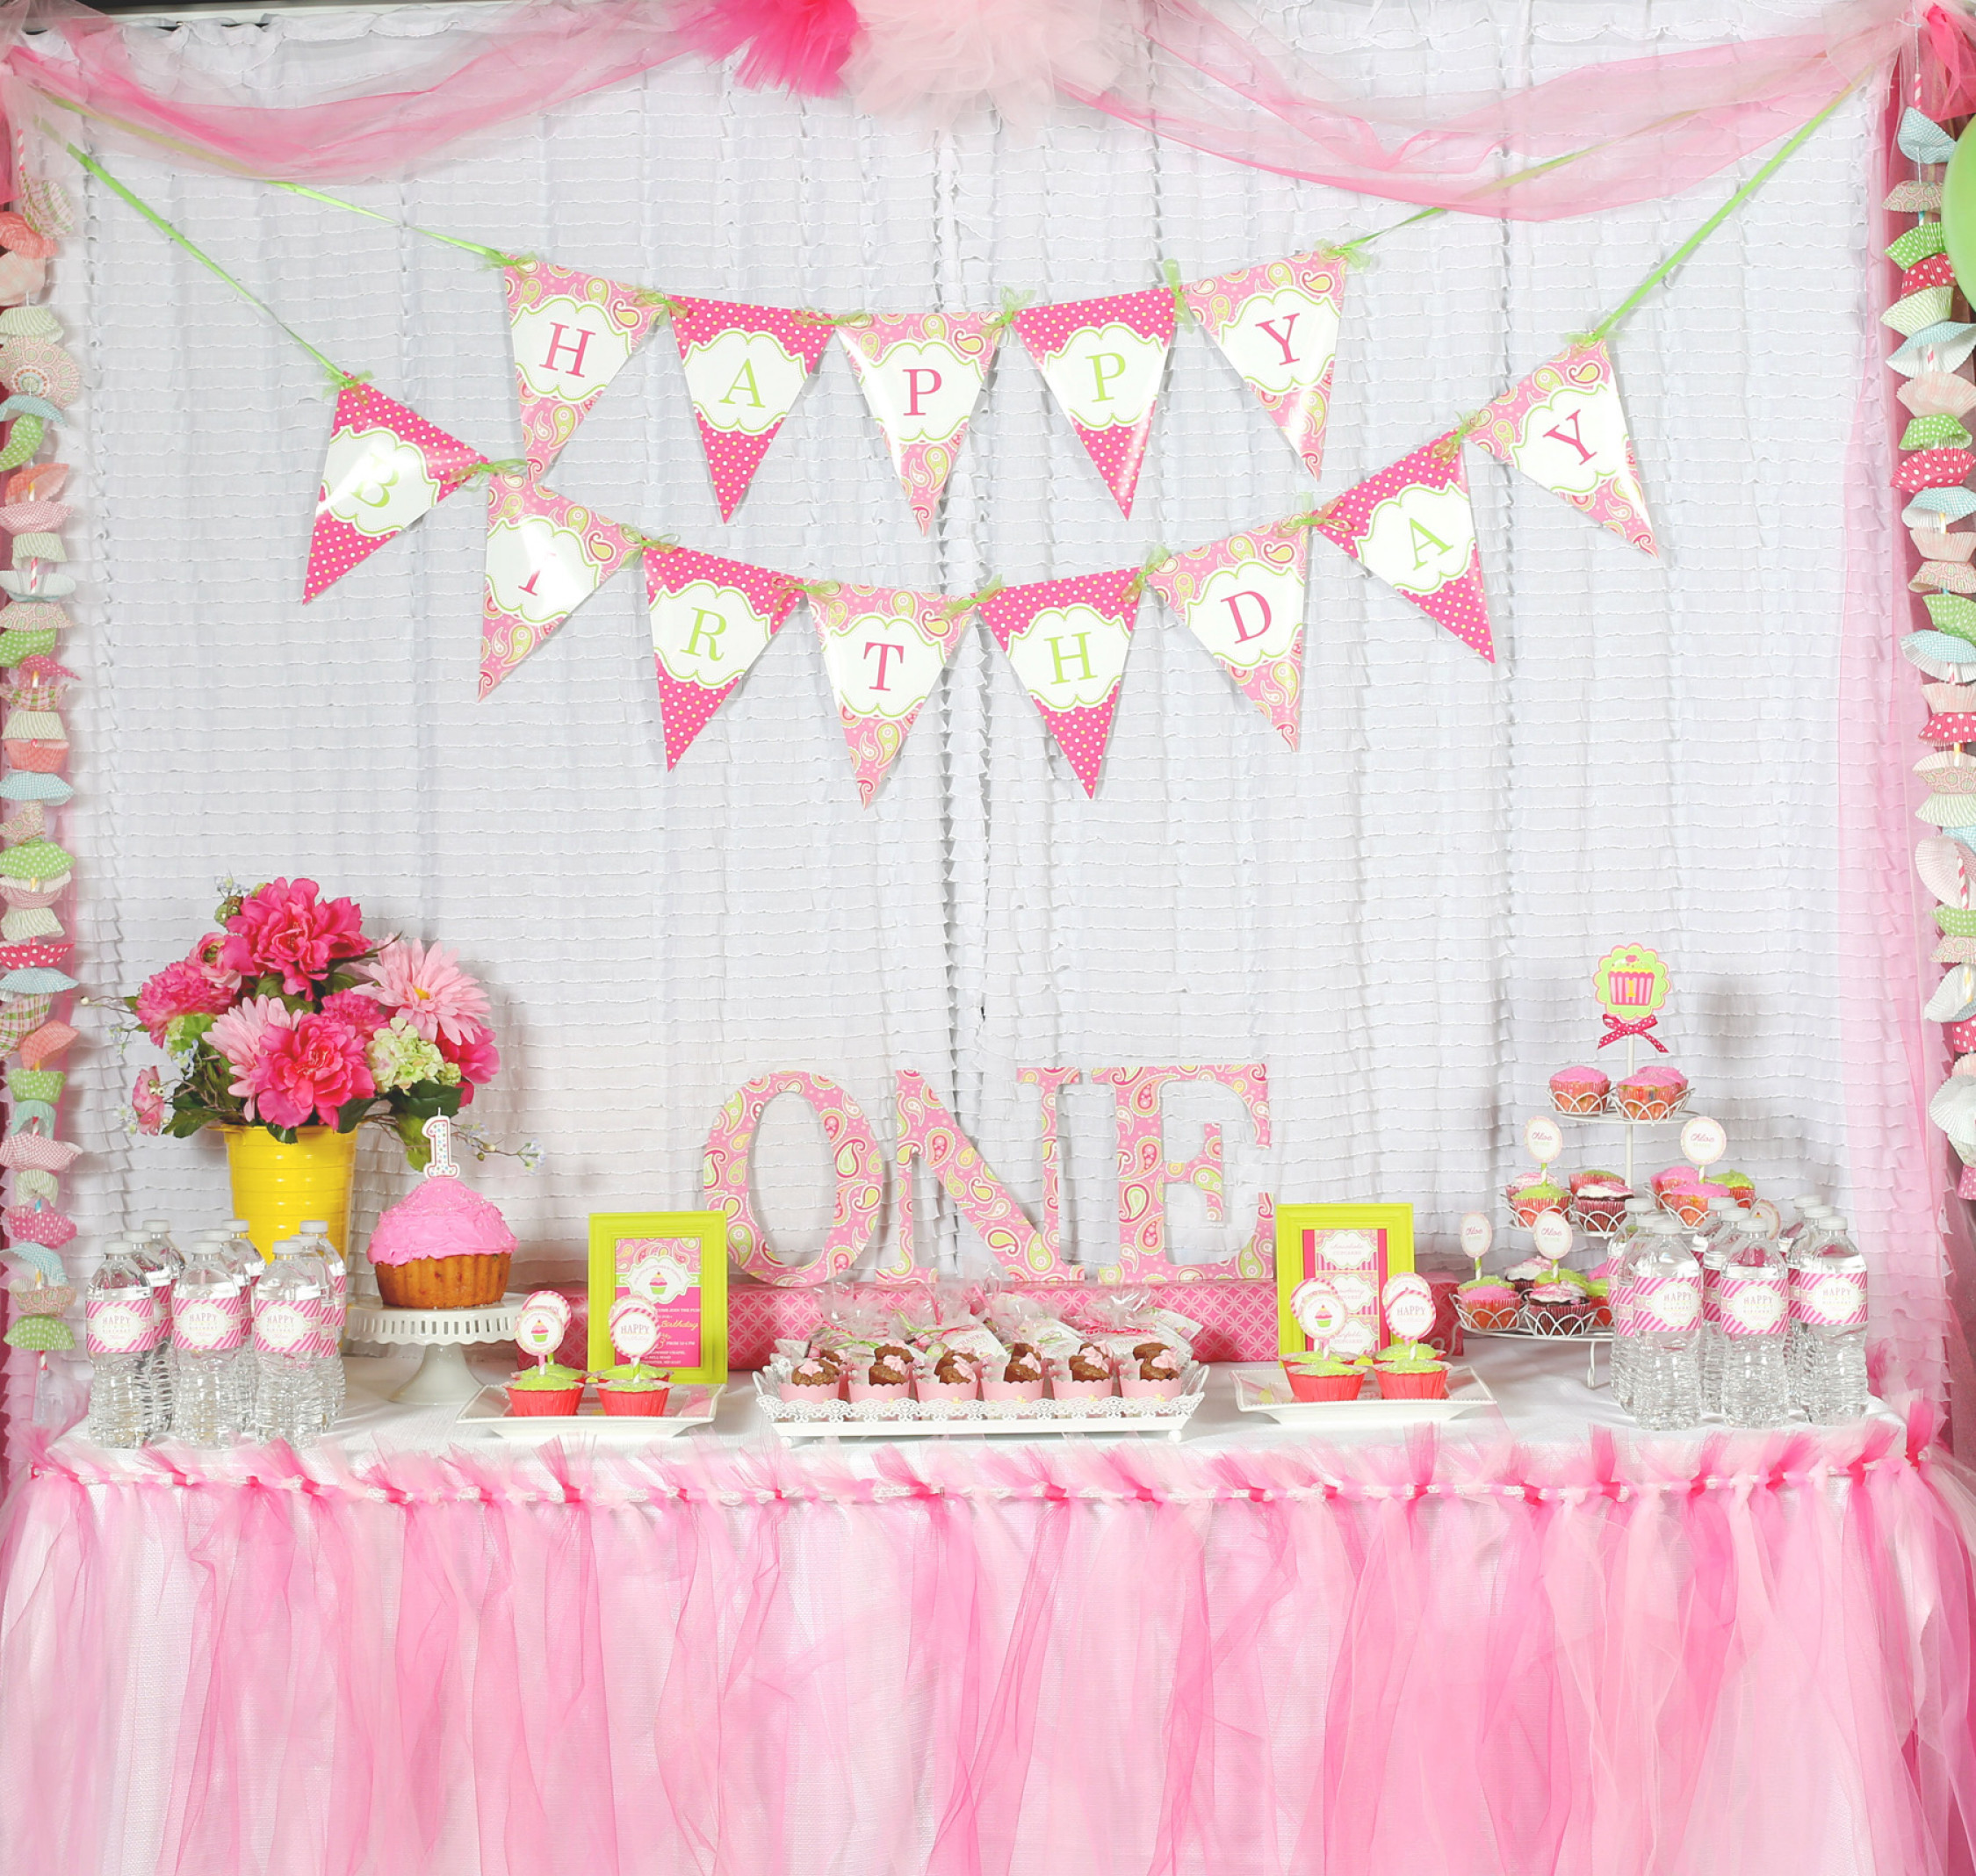 Girl Birthday Party Theme Ideas
 A Cupcake Themed 1st Birthday party with Paisley and Polka